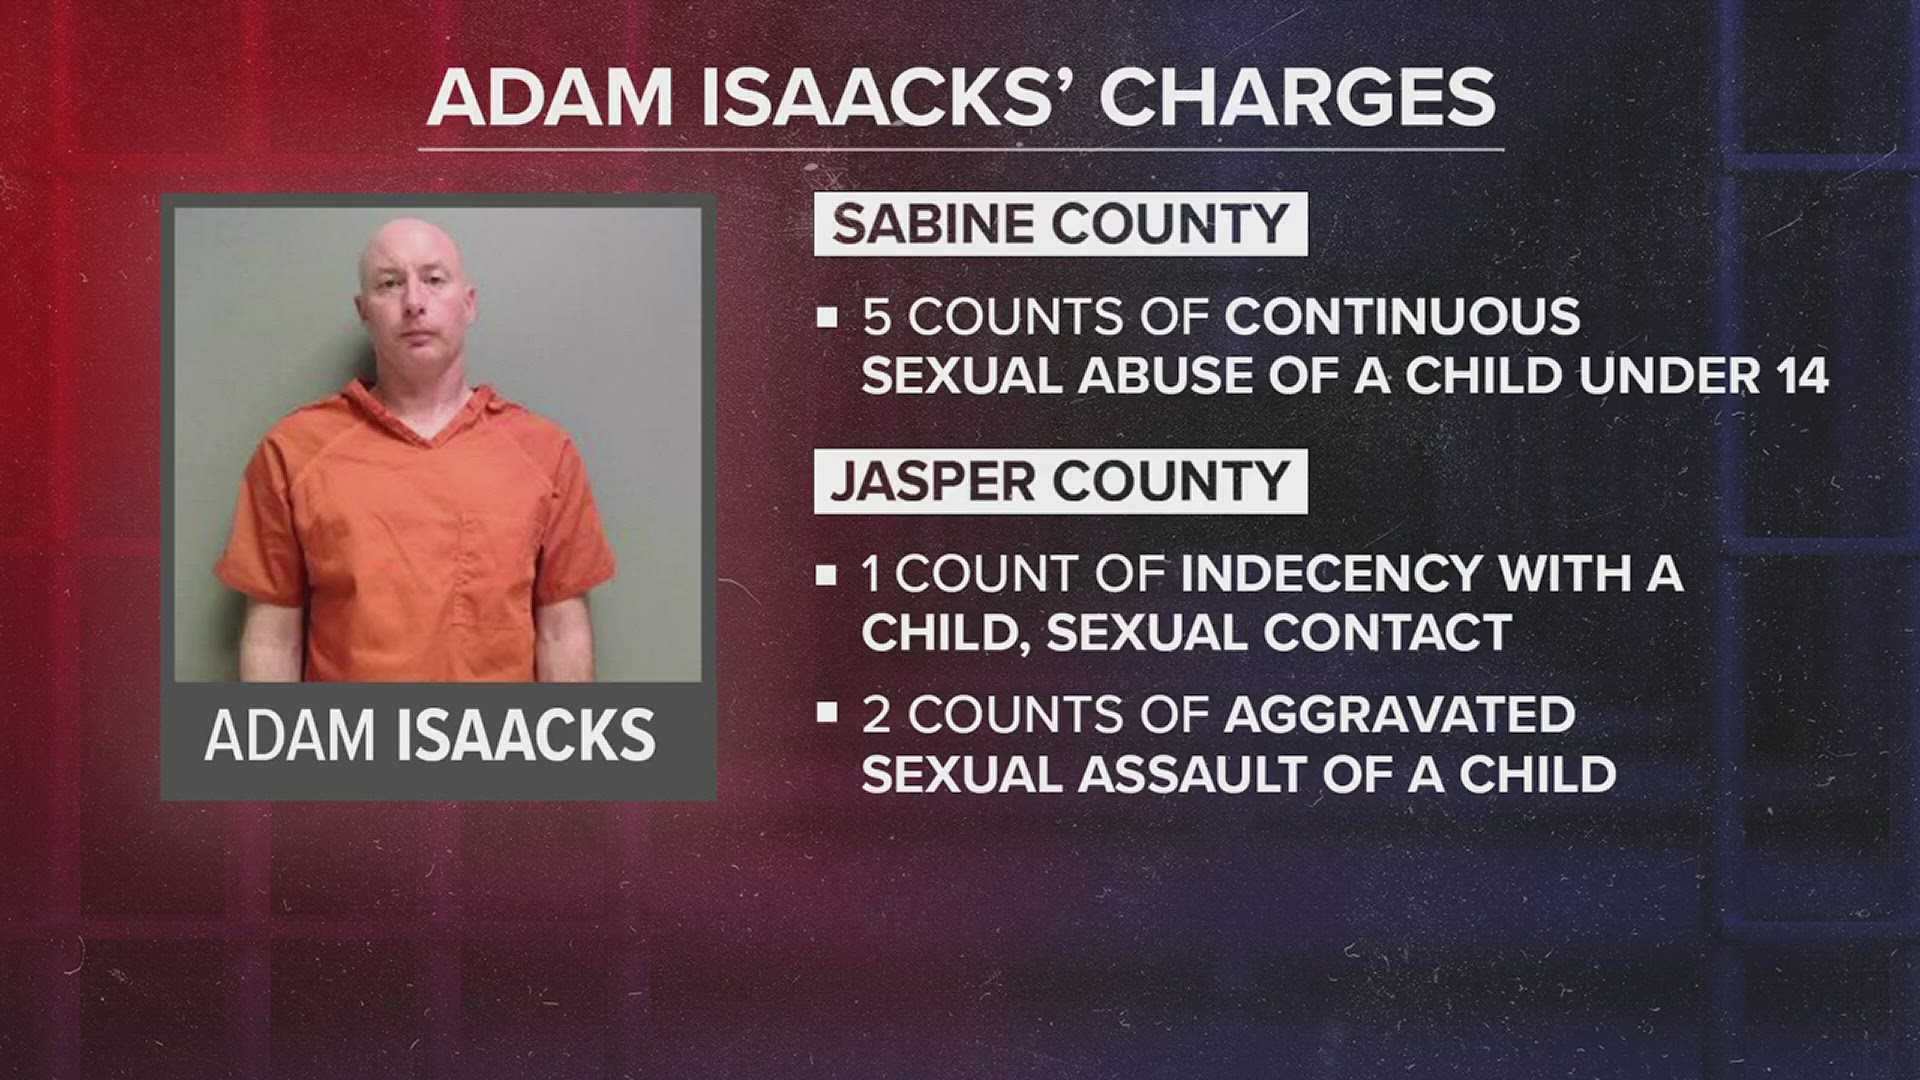 Adam Isaacks is now facing 15 combined charges at both the state and federal level.